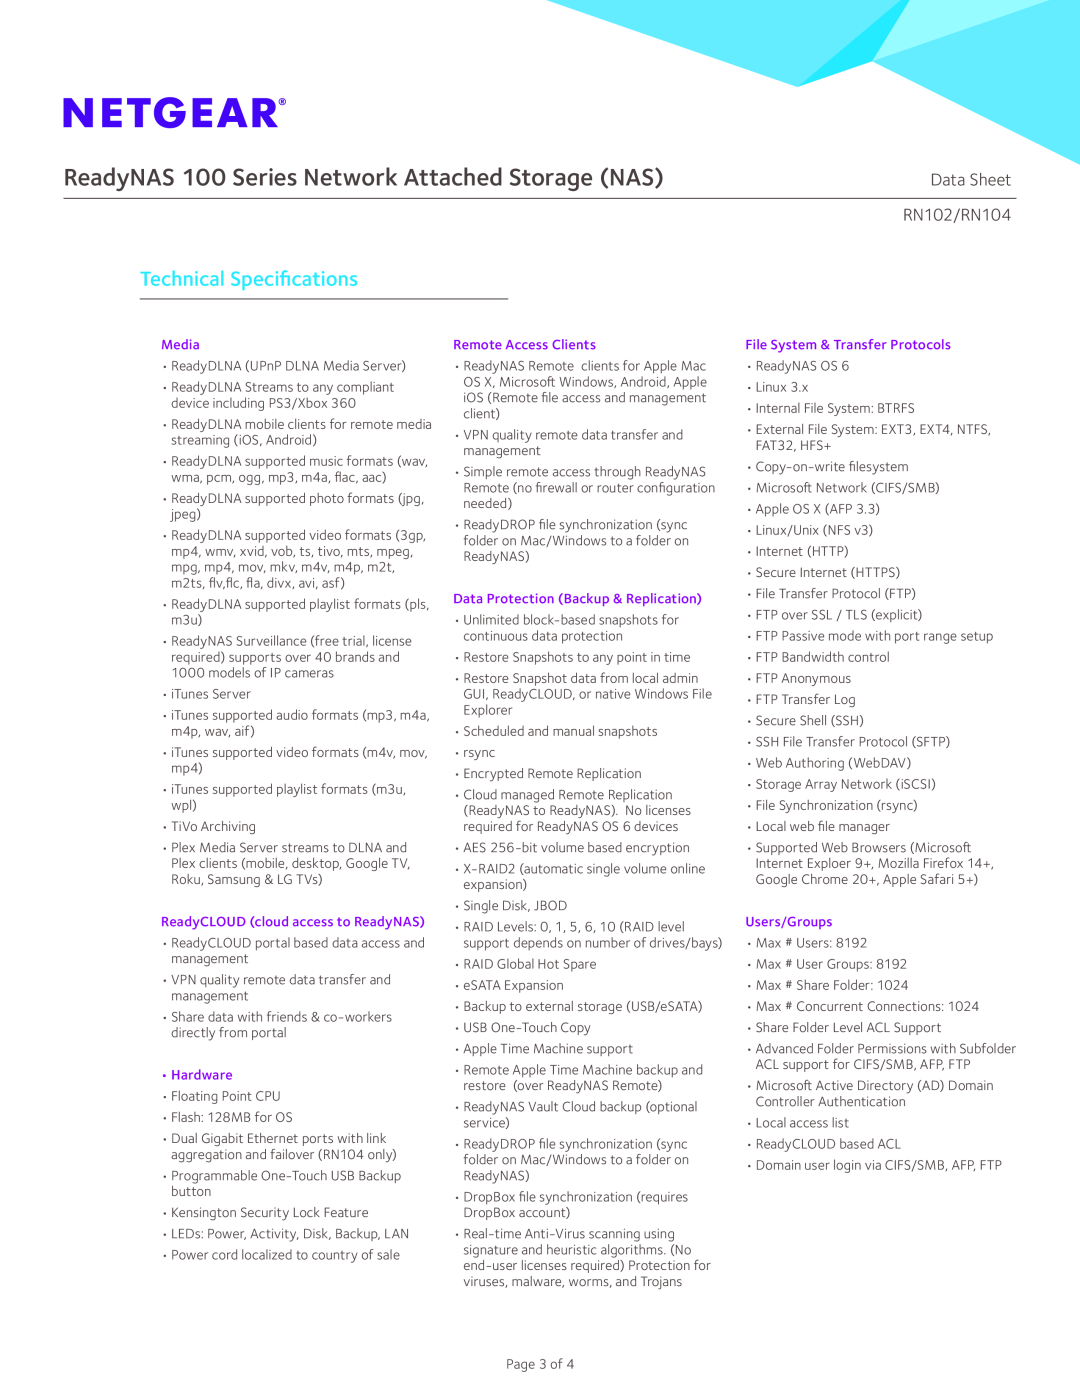 NETGEAR RN10200-100NAS Technical Specifications, ReadyNAS 100 Series Network Attached Storage NAS, Data Sheet, RN102/RN104 